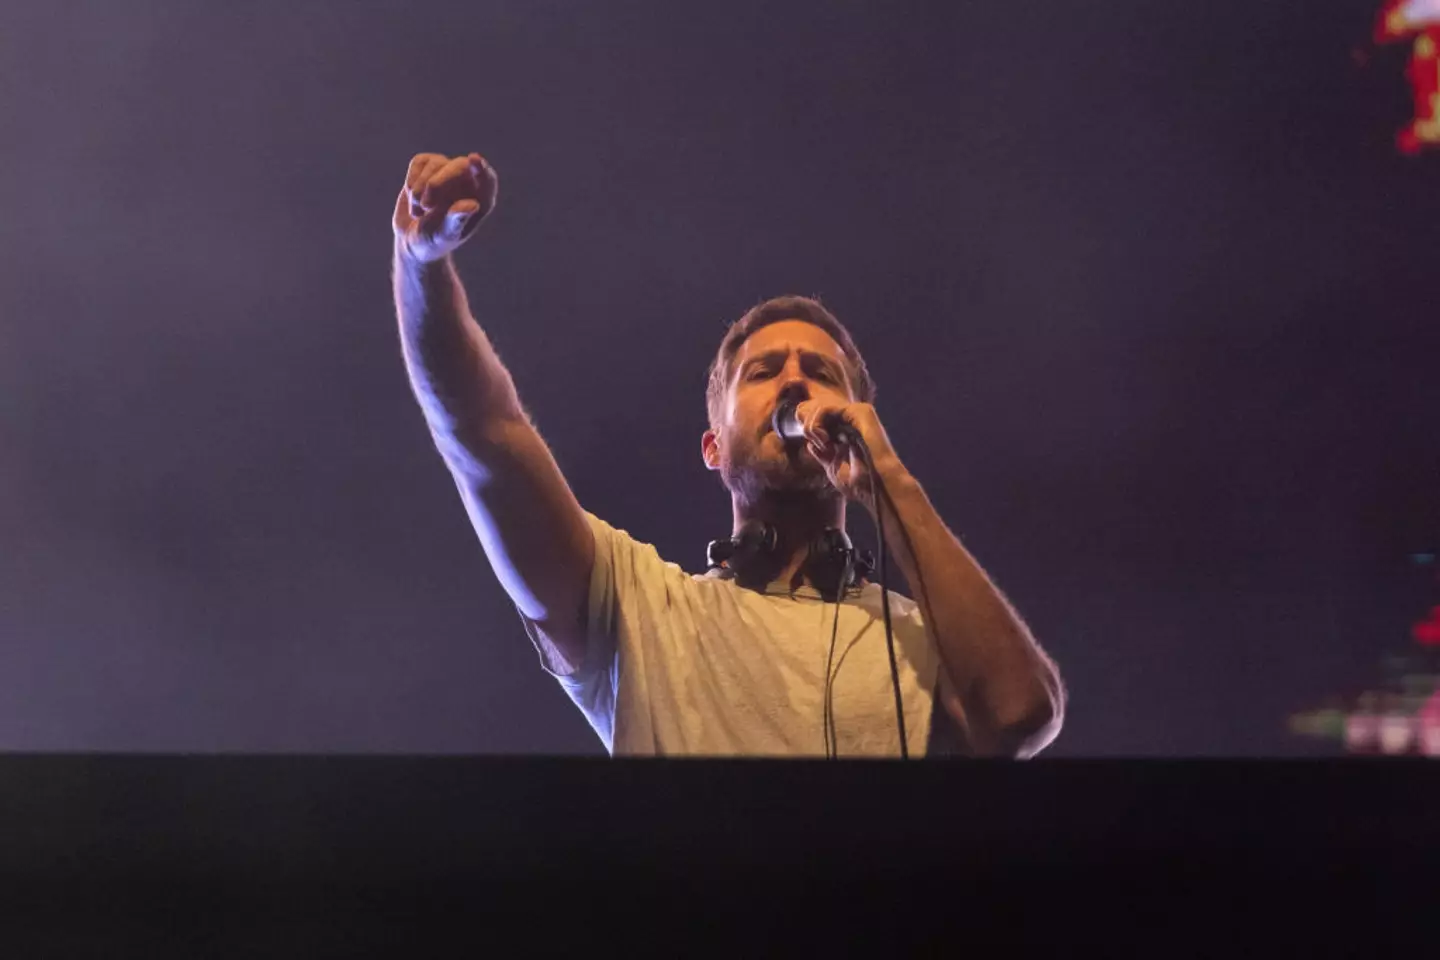 Calvin Harris said alcohol was 'clearly affecting' him and he felt much better since giving it up.